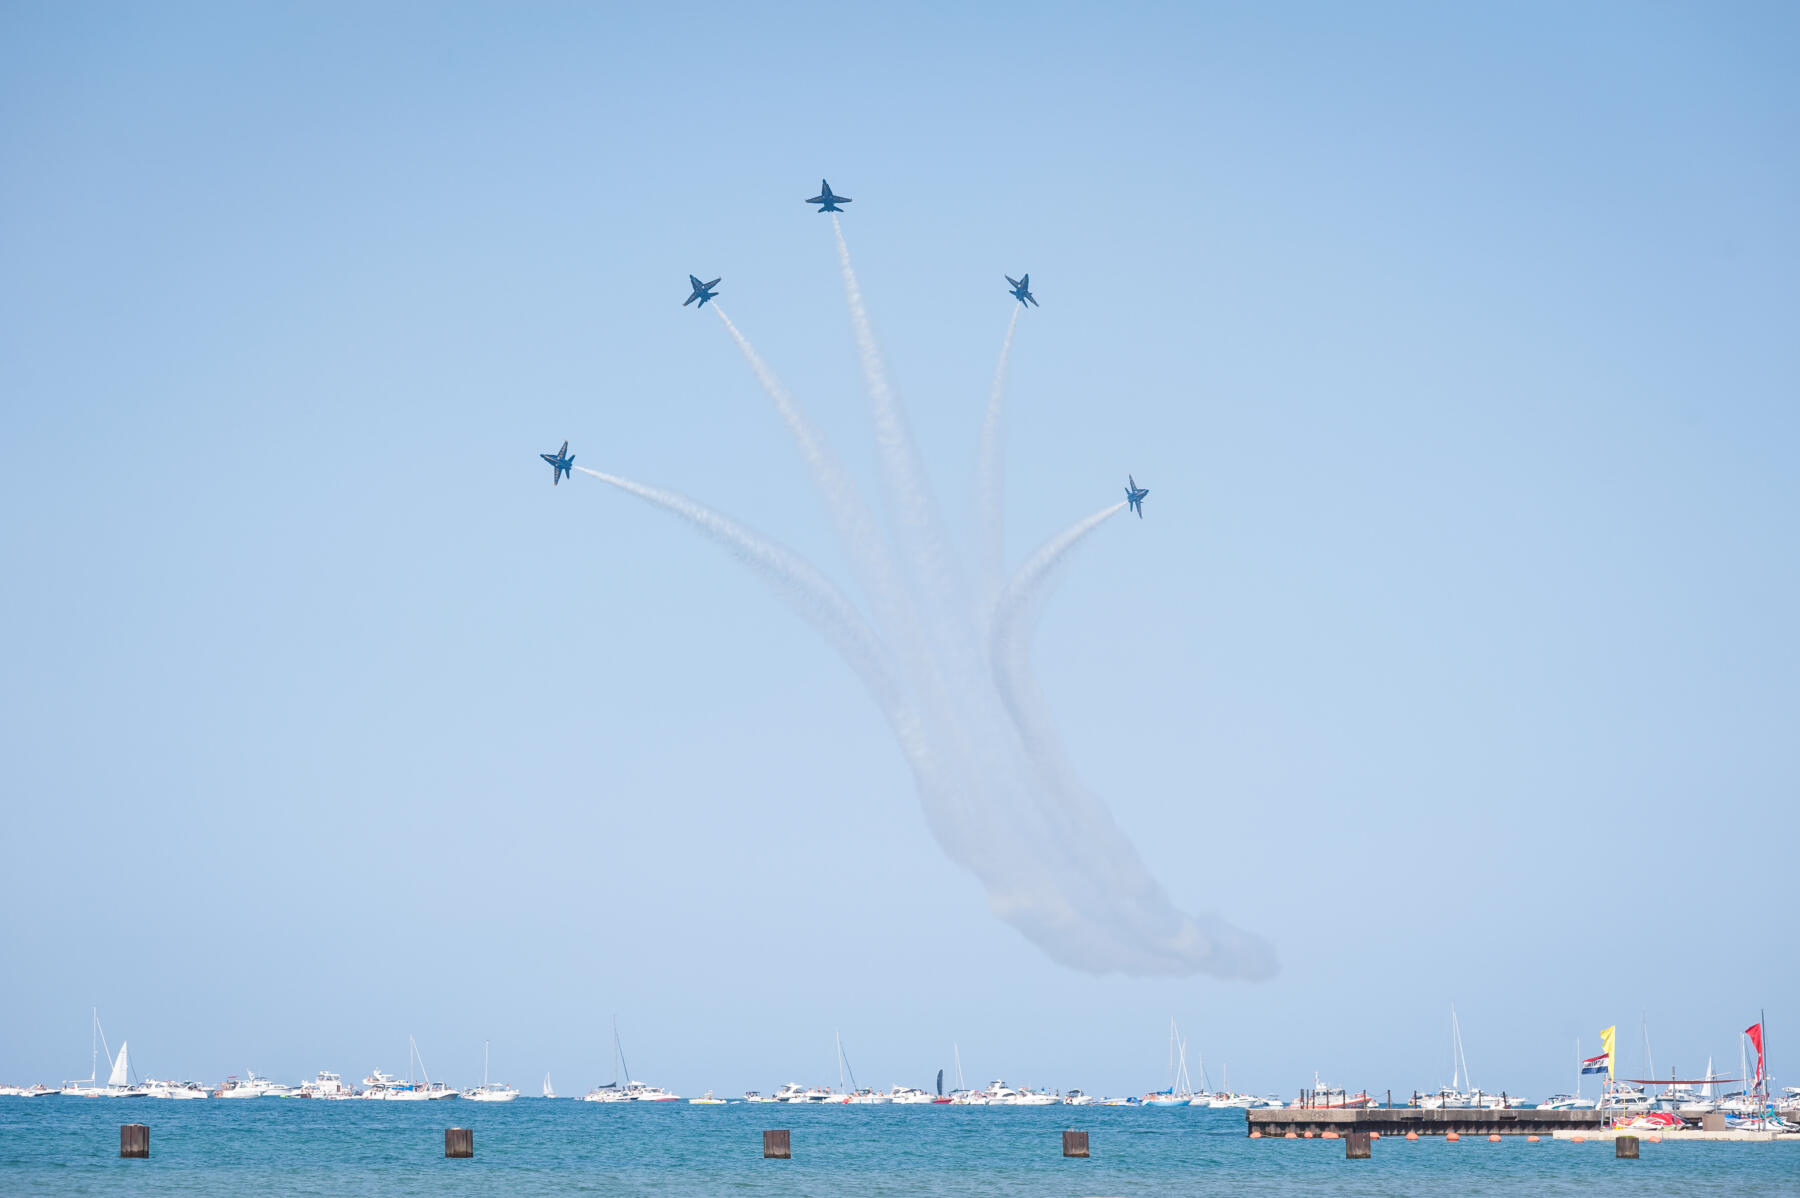 DCASE Air and Water Show air show at North Avenue beach summer 2017 US Navy Blue Angels perform